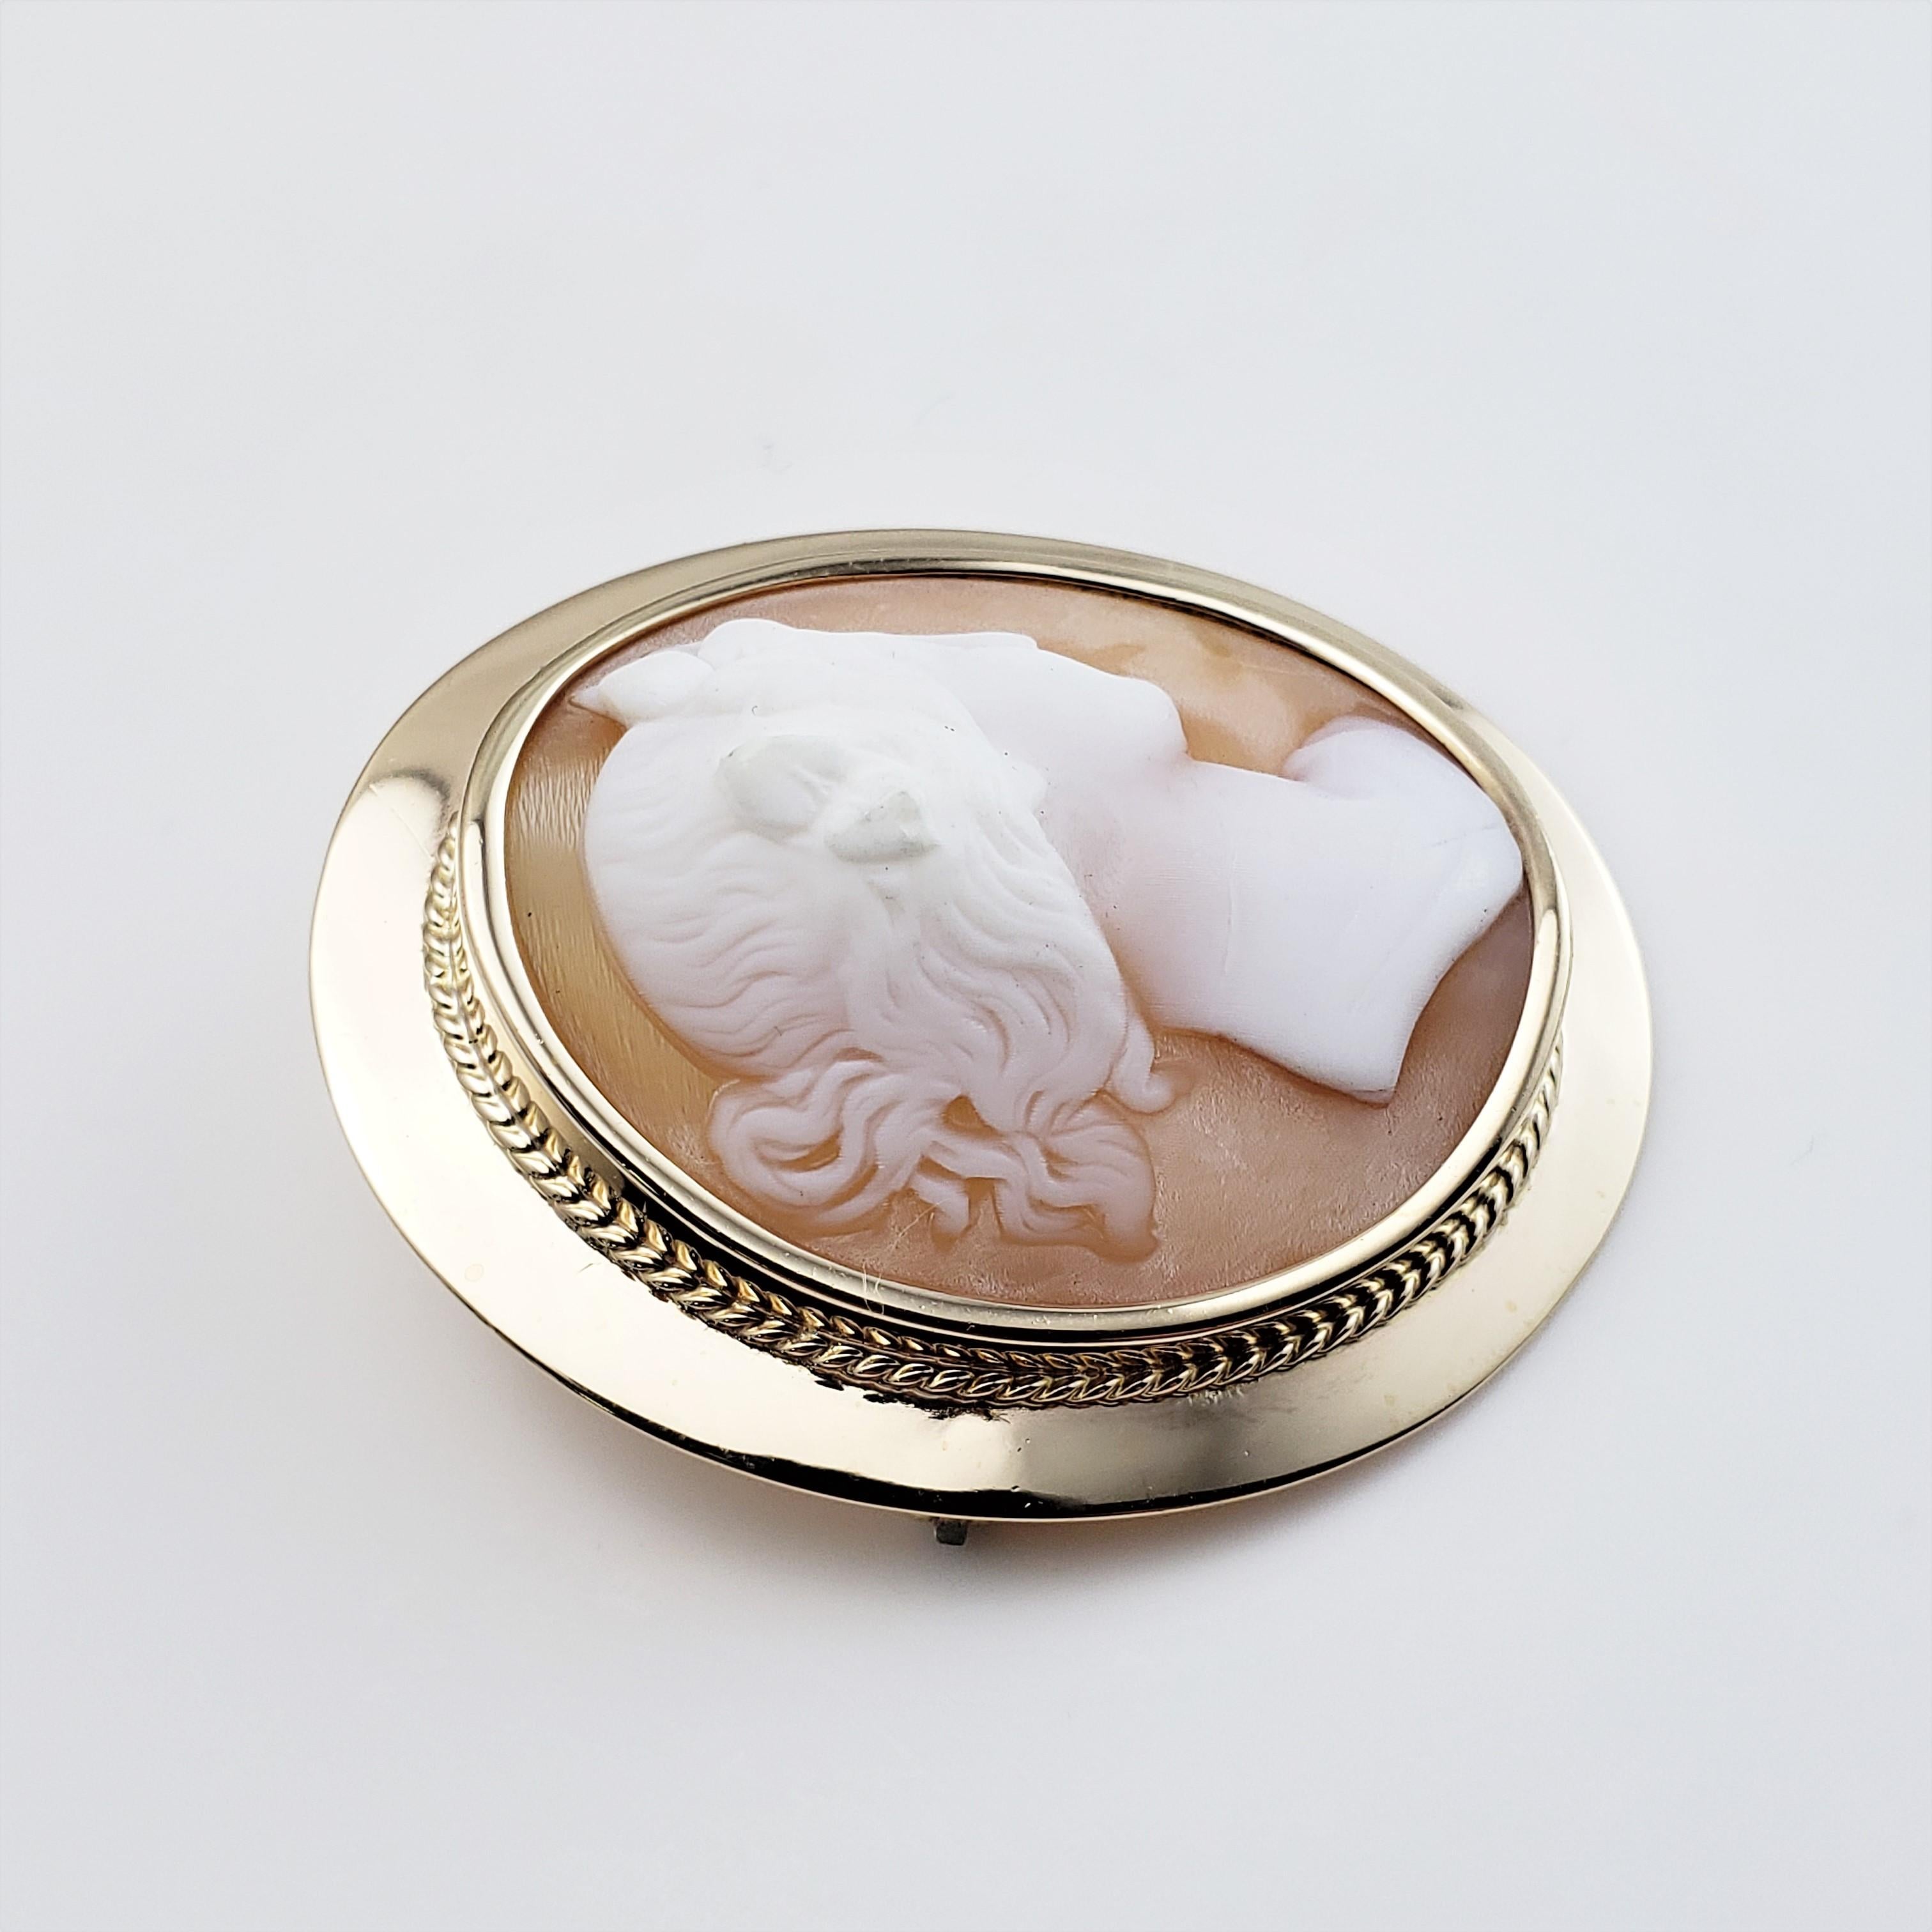 14 Karat Yellow Gold Cameo Brooch/Pin-

This lovely cameo brooch features a lovely lady in profile set in beautifully detailed 14K yellow gold.

Can be worn as a brooch or a pendant.

Size:  1.6 inches x 1.4 inches

Weight:  6.7 dwt./  10.5